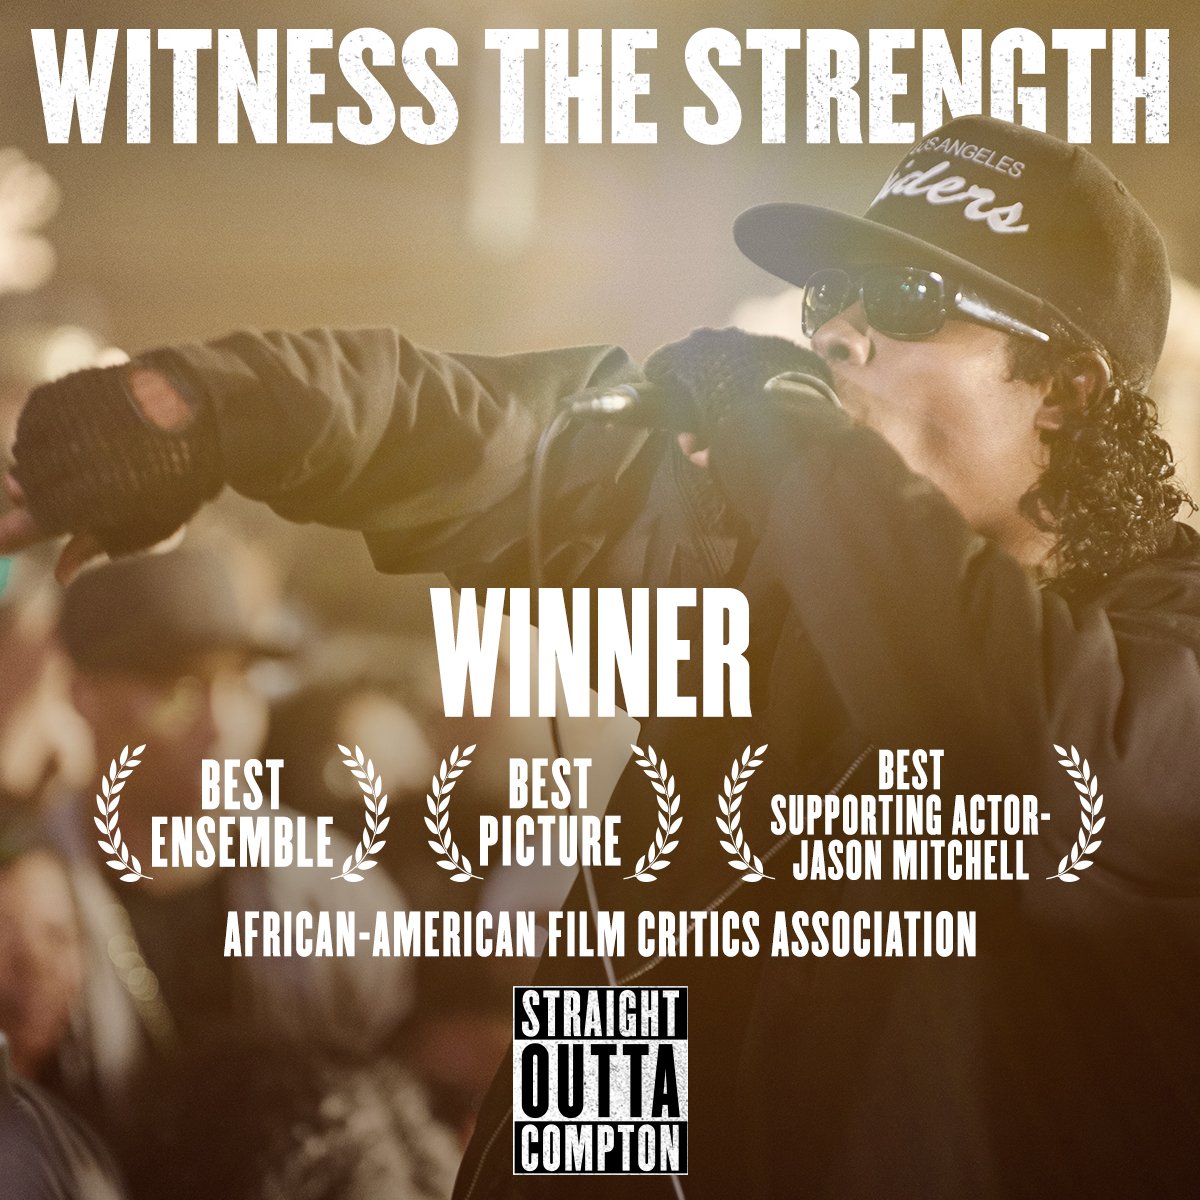 #StraightOuttaCompton winner of Best Picture, Best Ensemble, and Best Supporting Actor (@jasonmitch) from @theaafca https://t.co/JxfvGWubxw